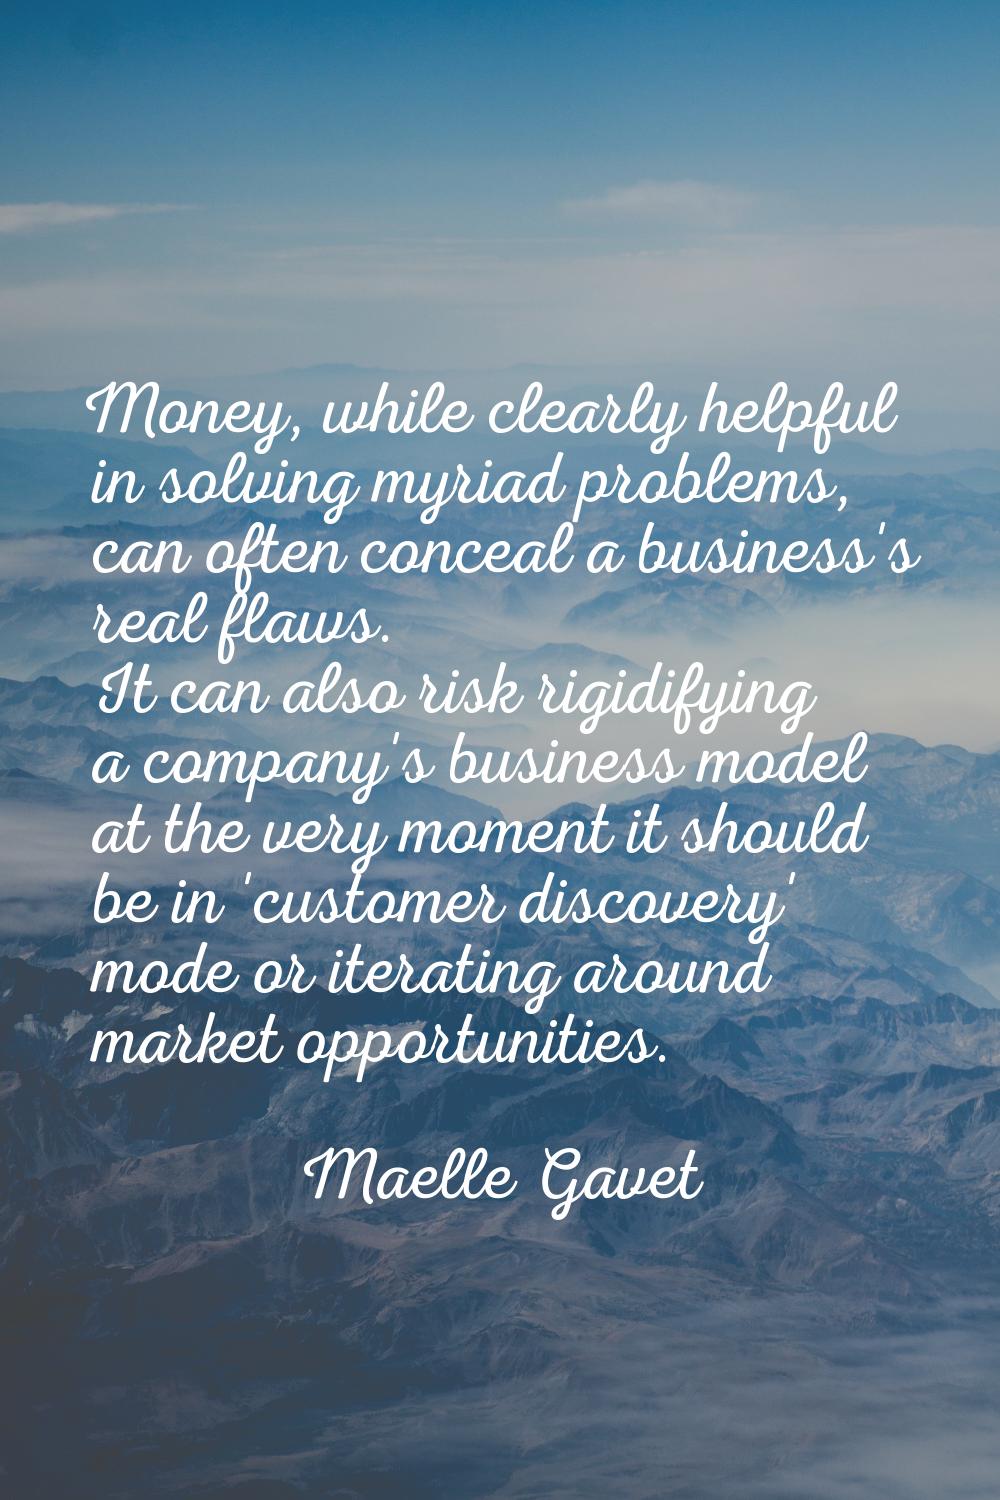 Money, while clearly helpful in solving myriad problems, can often conceal a business's real flaws.